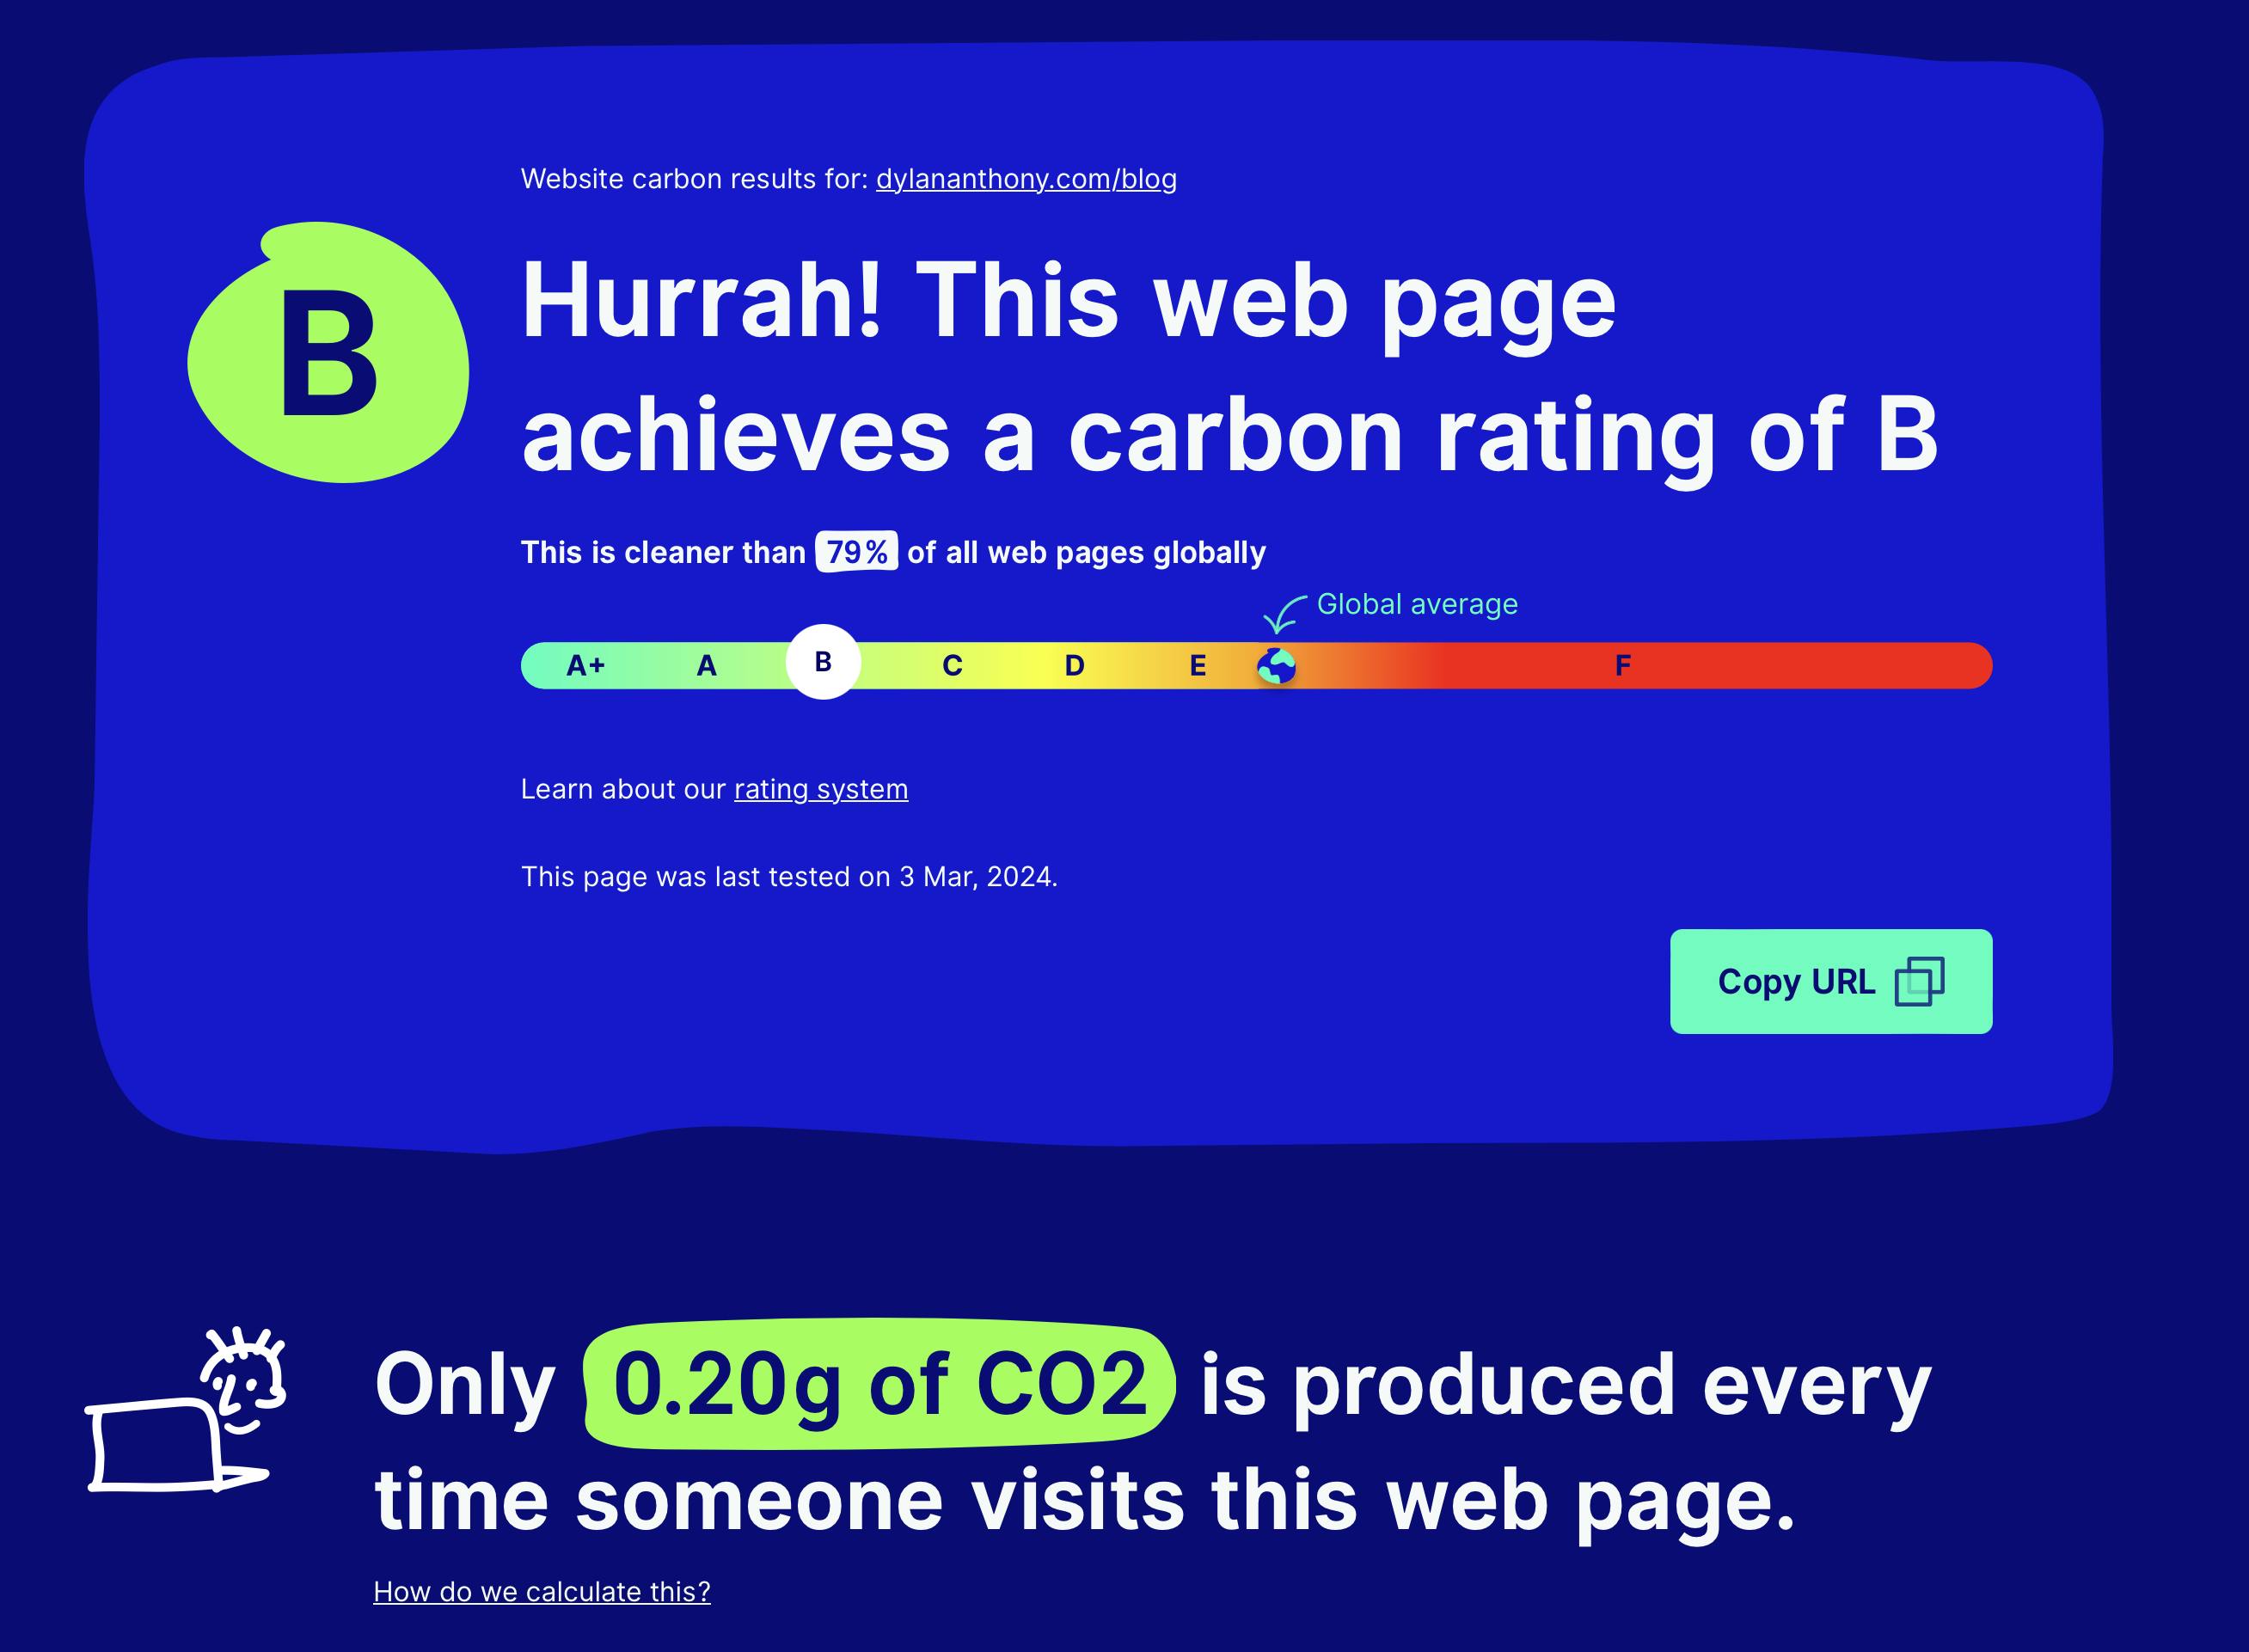 A screenshot of websitecarbon.com. There is a scale from A+ (best) to F (worst), and my website gets a B.   This is cleaner than 79% of other websites, with the global average being between E and F.   Below the scale, the website states "Only 0.20g of CO2 is produced every time someone visits this webpage"